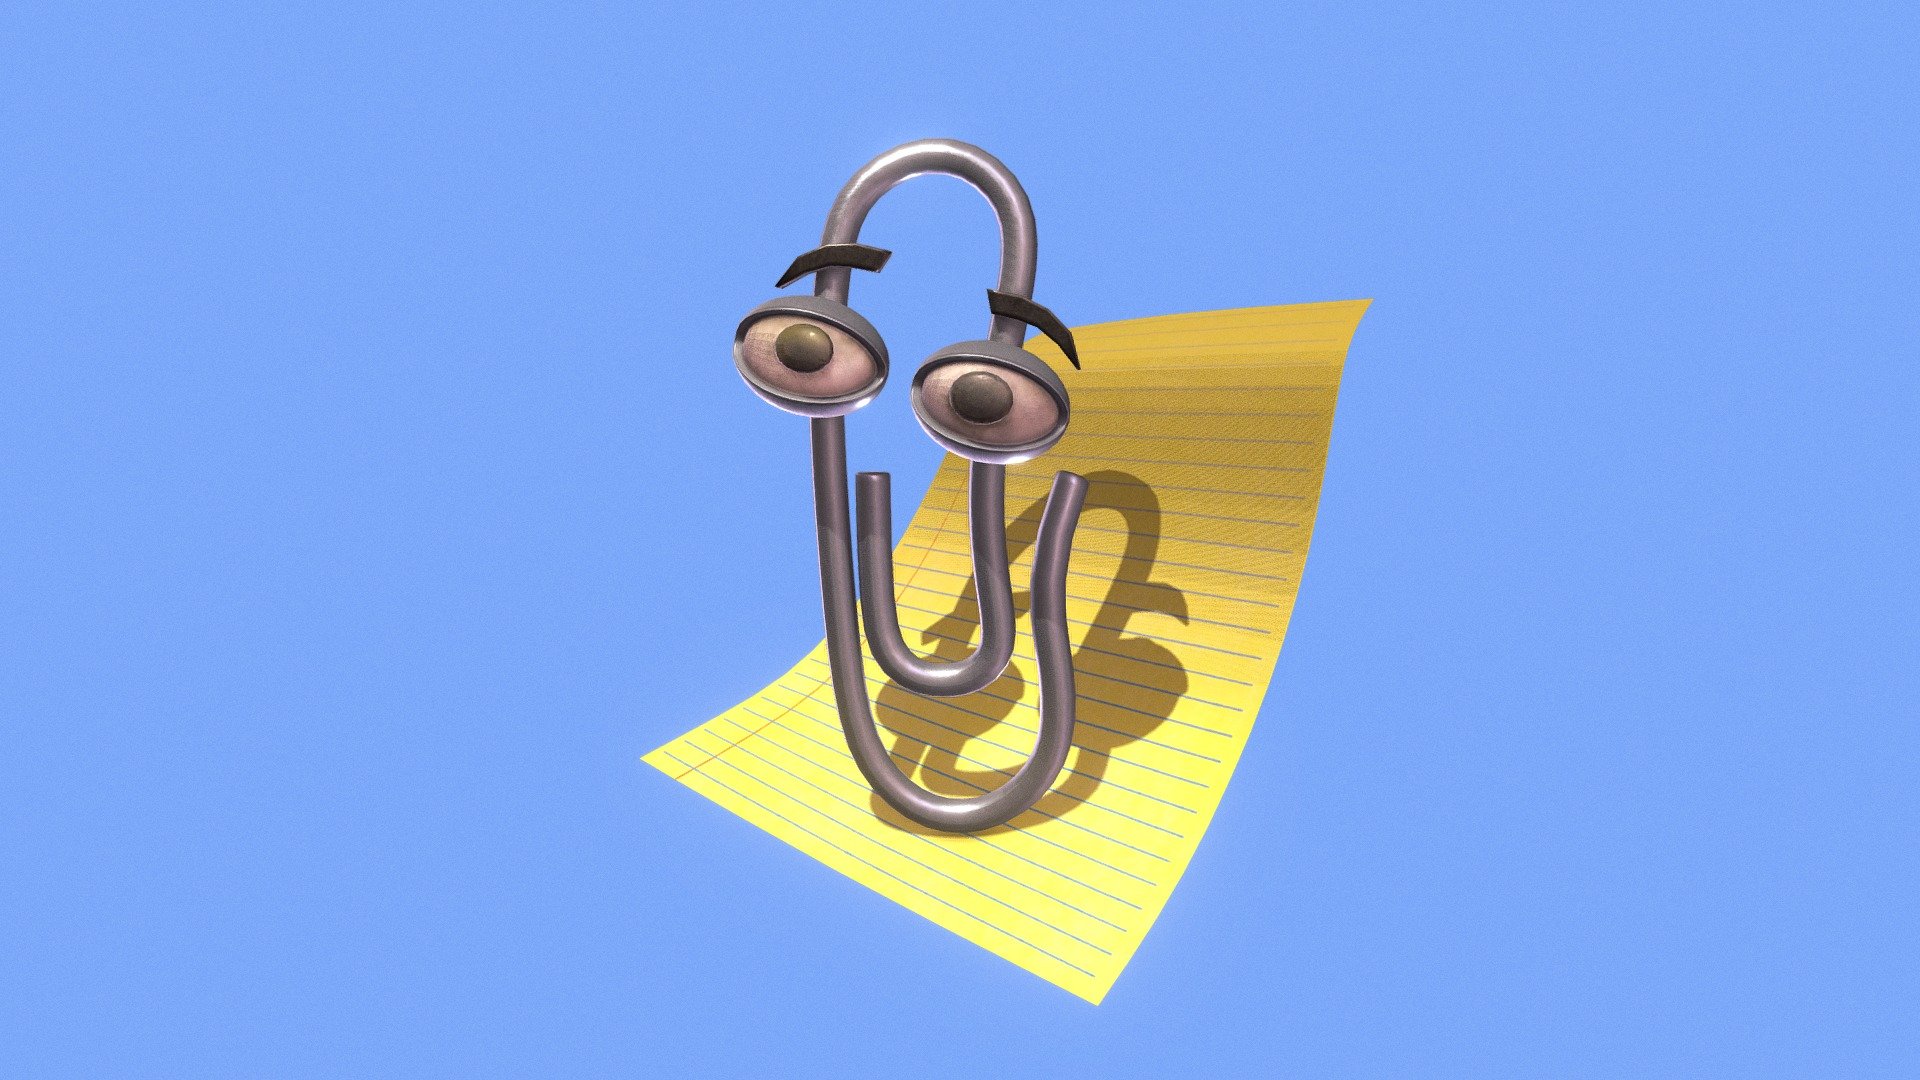 Thanks to Micrsoft, the office assistant was popularised around the time i started learning about computer! one of my many Millennials nostalgia.
http://knowyourmeme.com/memes/clippy

i rememeber trying to type to clippy and wonder why doesn't him talk back more inteligently. all the animation that came with it! if you guys like this i may spare some time to animate him!

One more fun thing for clippy fanatics:
https://www.smore.com/clippy-js - PBR Clippy Microsoft Office Assistant - Buy Royalty Free 3D model by twitte_king 3d model